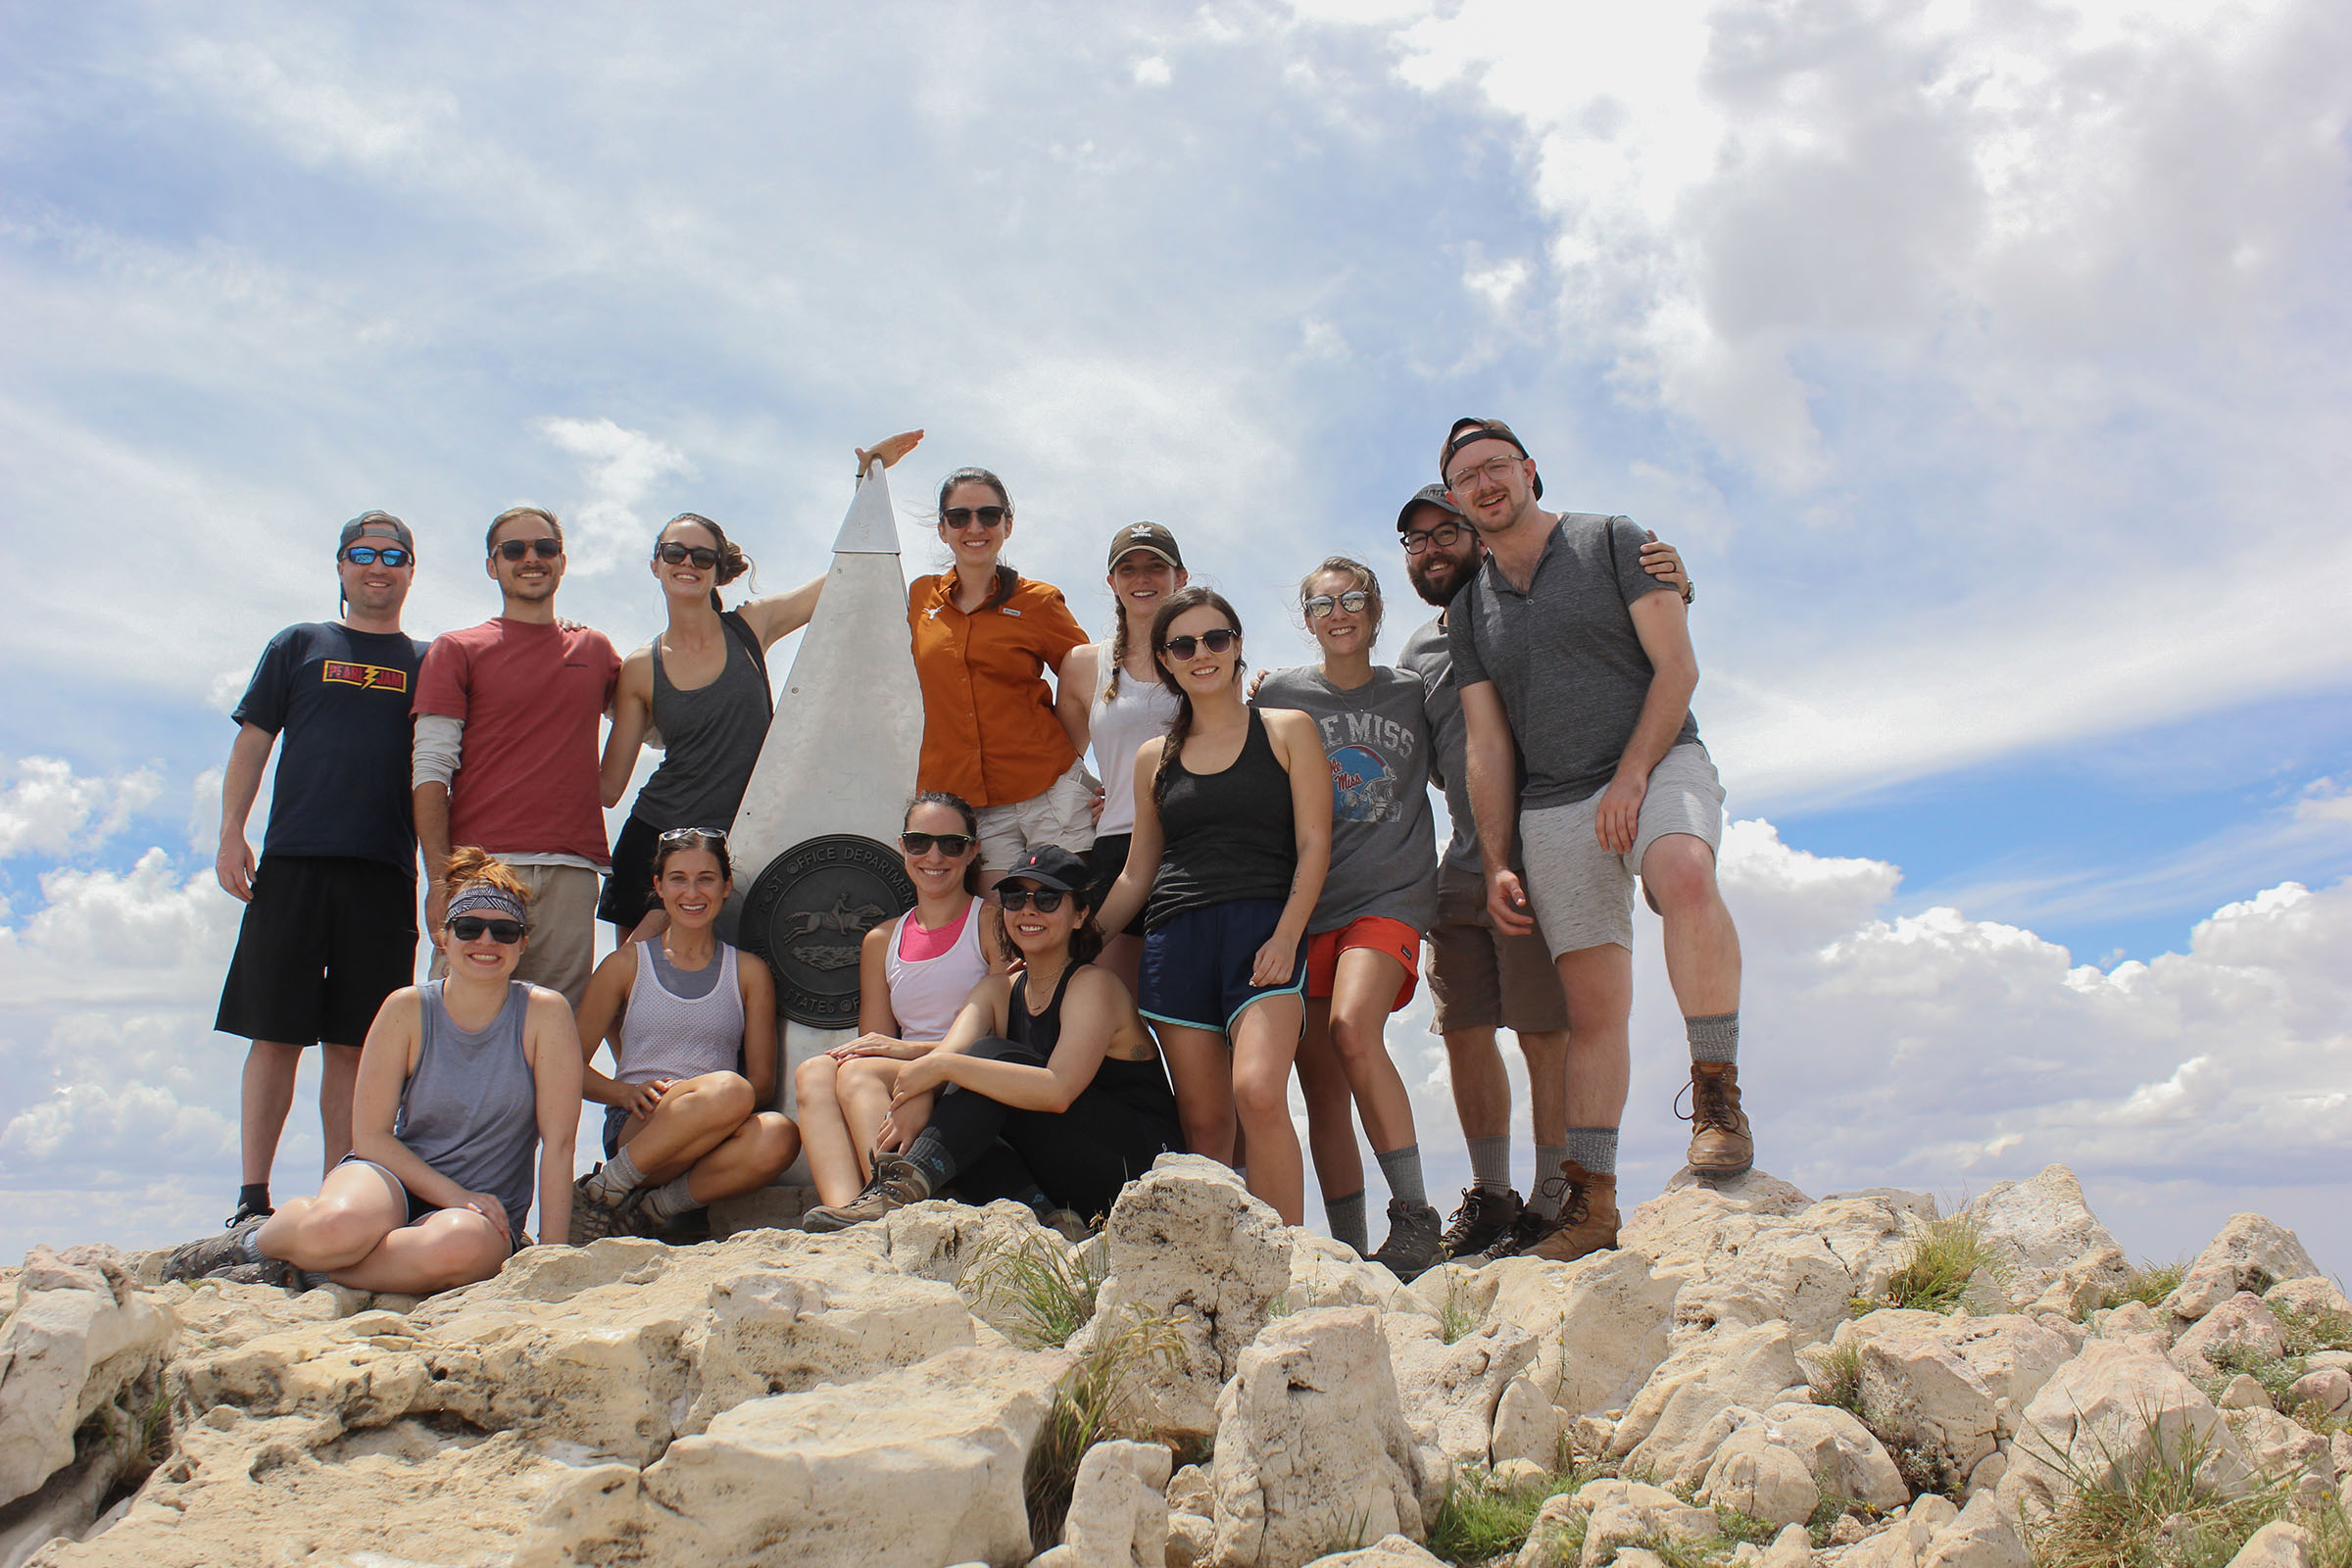 The group of hikers who witnessed the engagement pose at the top of Guadalupe Peak